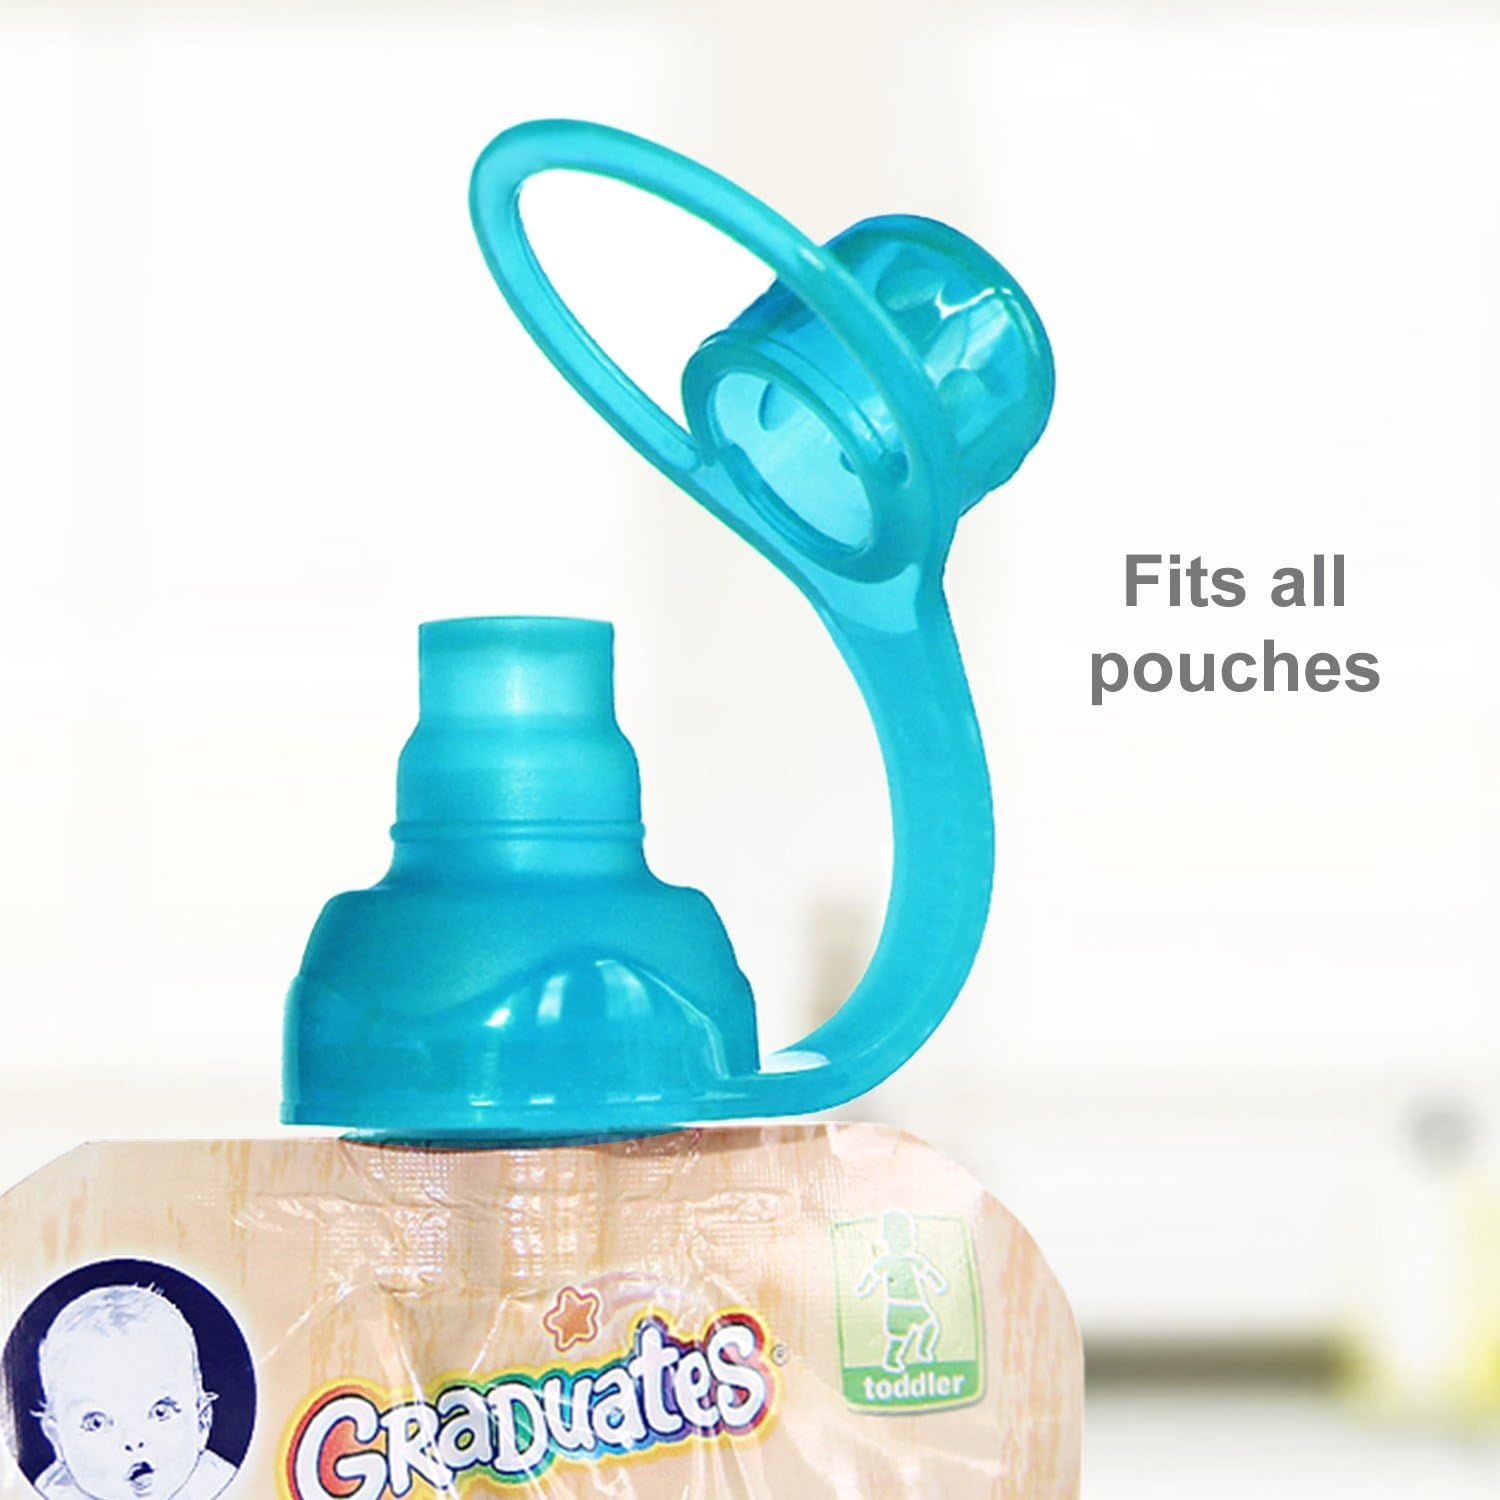 ChooMee SoftSip Food Pouch Top | Baby Led Weaning | No Spill Flow Control Valve, Protects Childs Mou | Amazon (US)